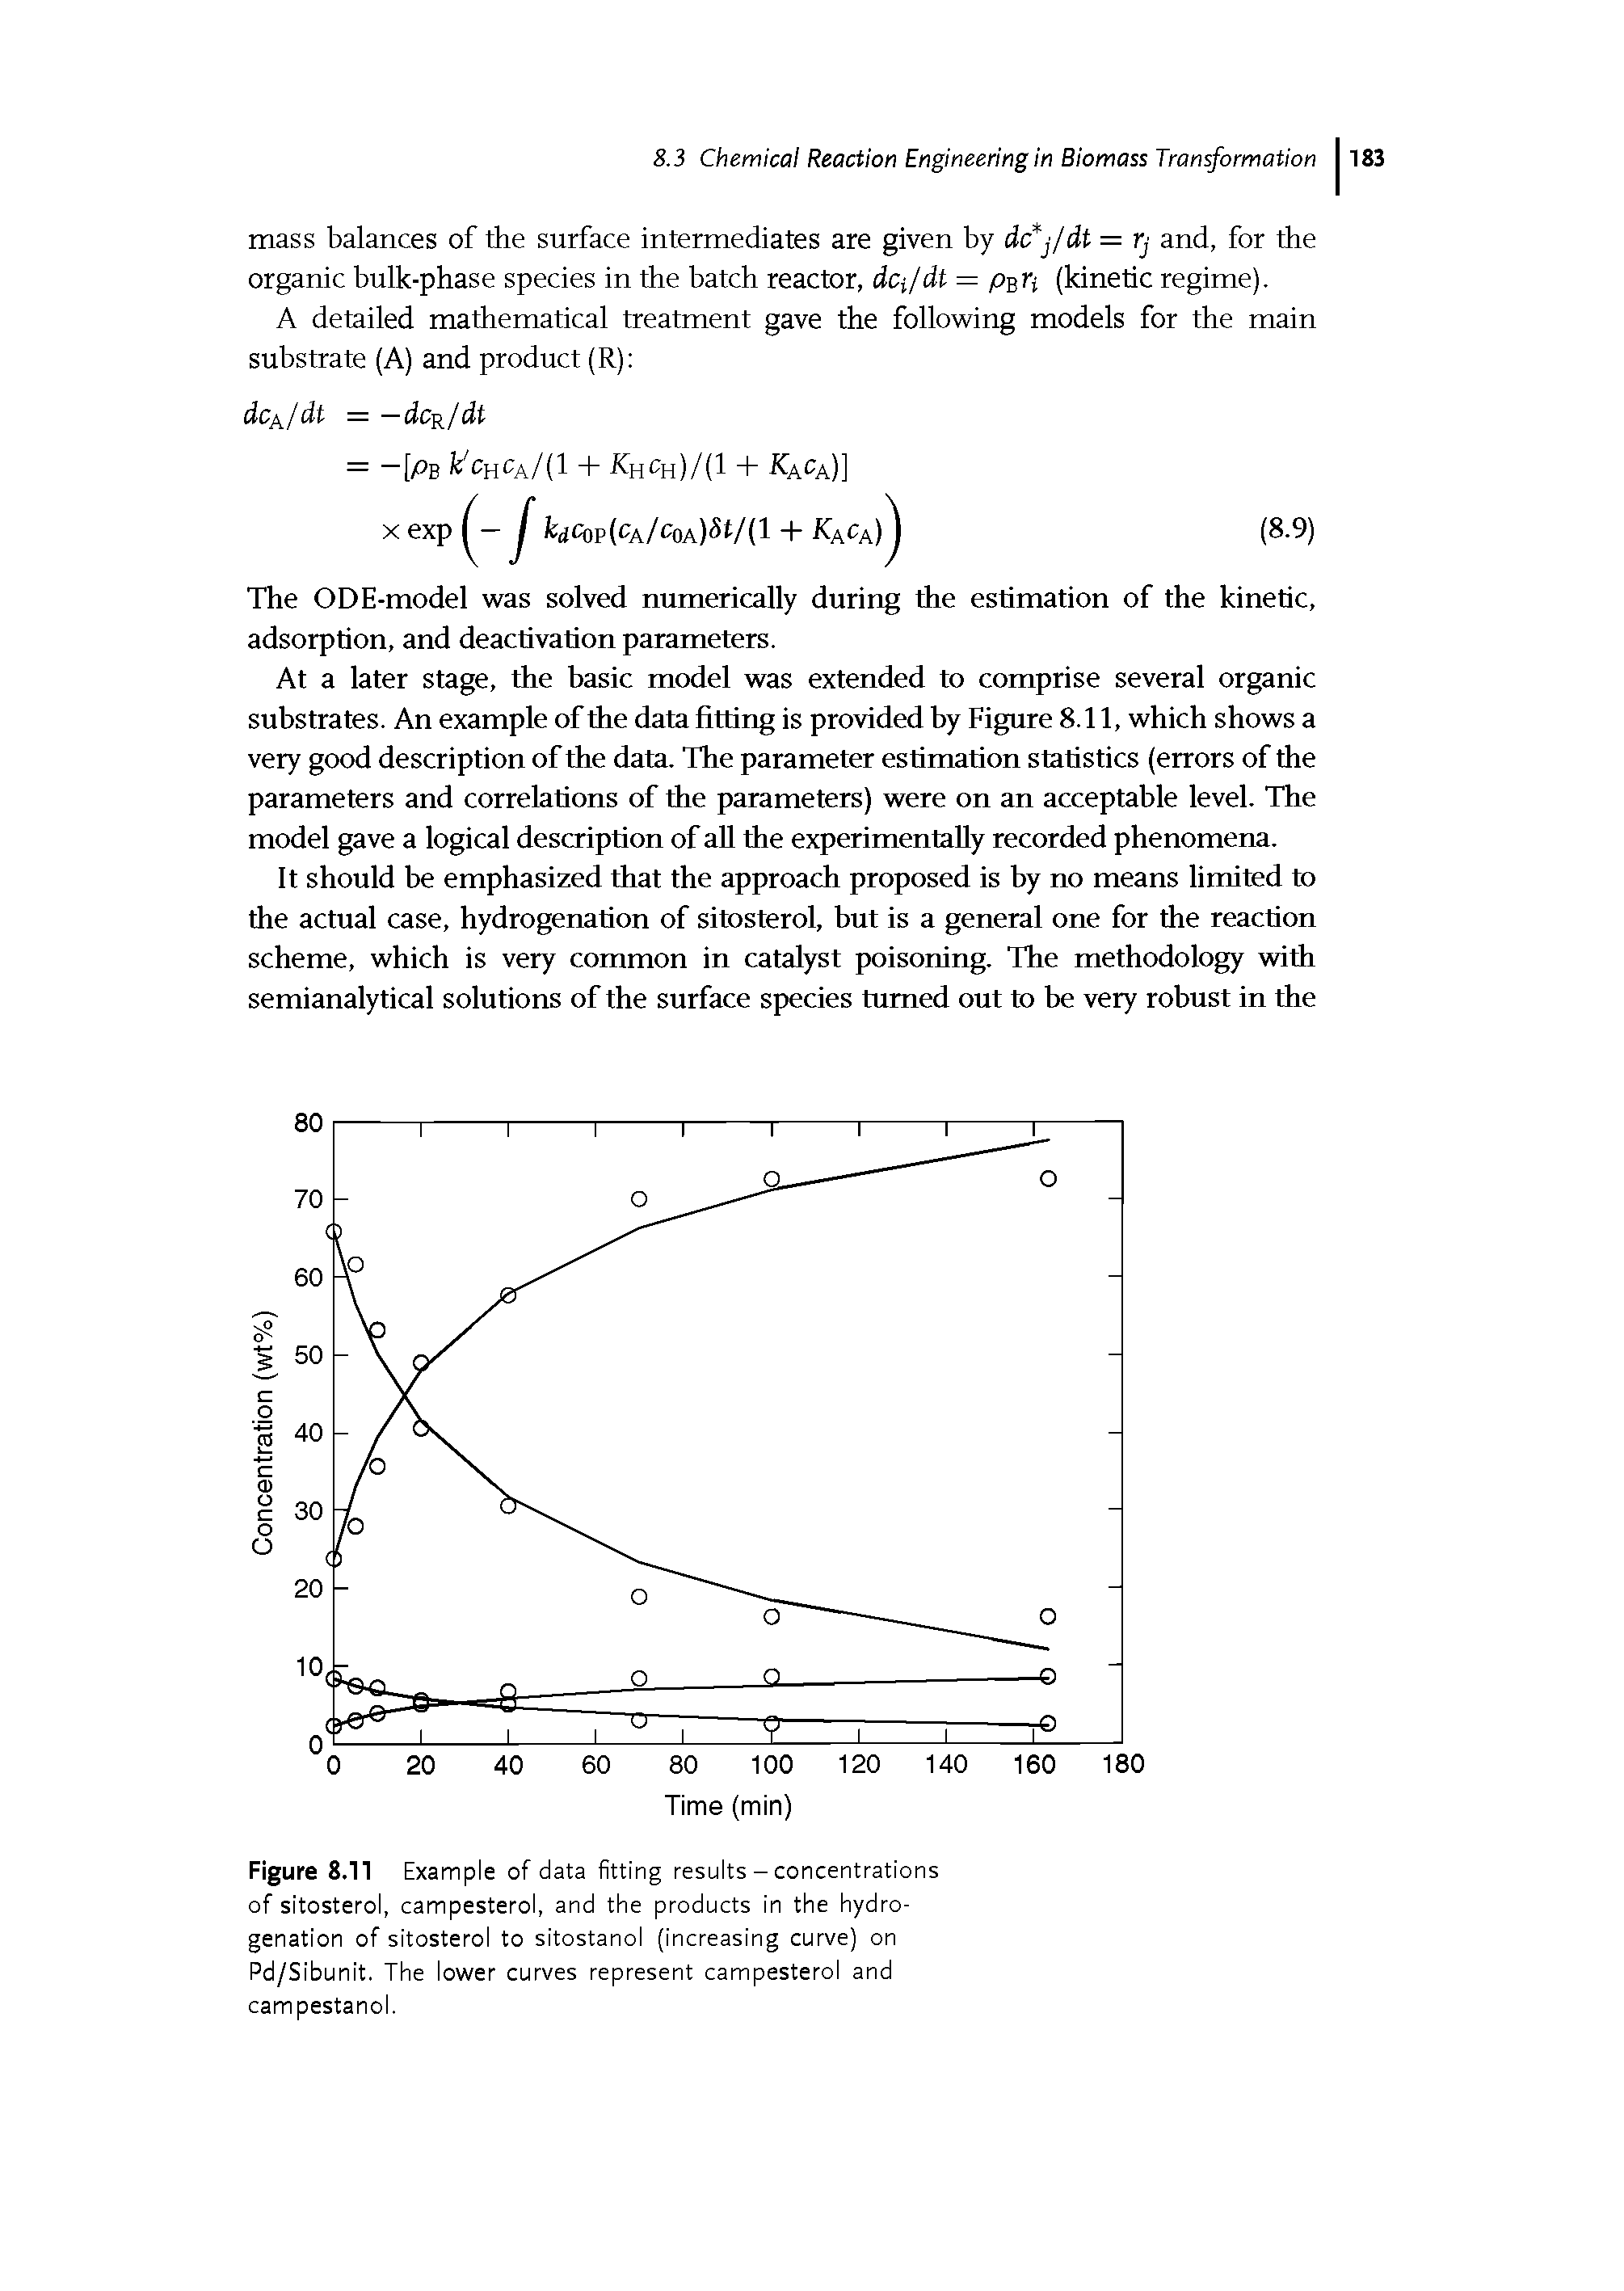 Figure 8.11 Example of data fitting results - concentrations of sitosterol, campesterol, and the products in the hydrogenation of sitosterol to sitostanol (increasing curve) on Pd/Sibunit. The lower curves represent campesterol and campestanol.